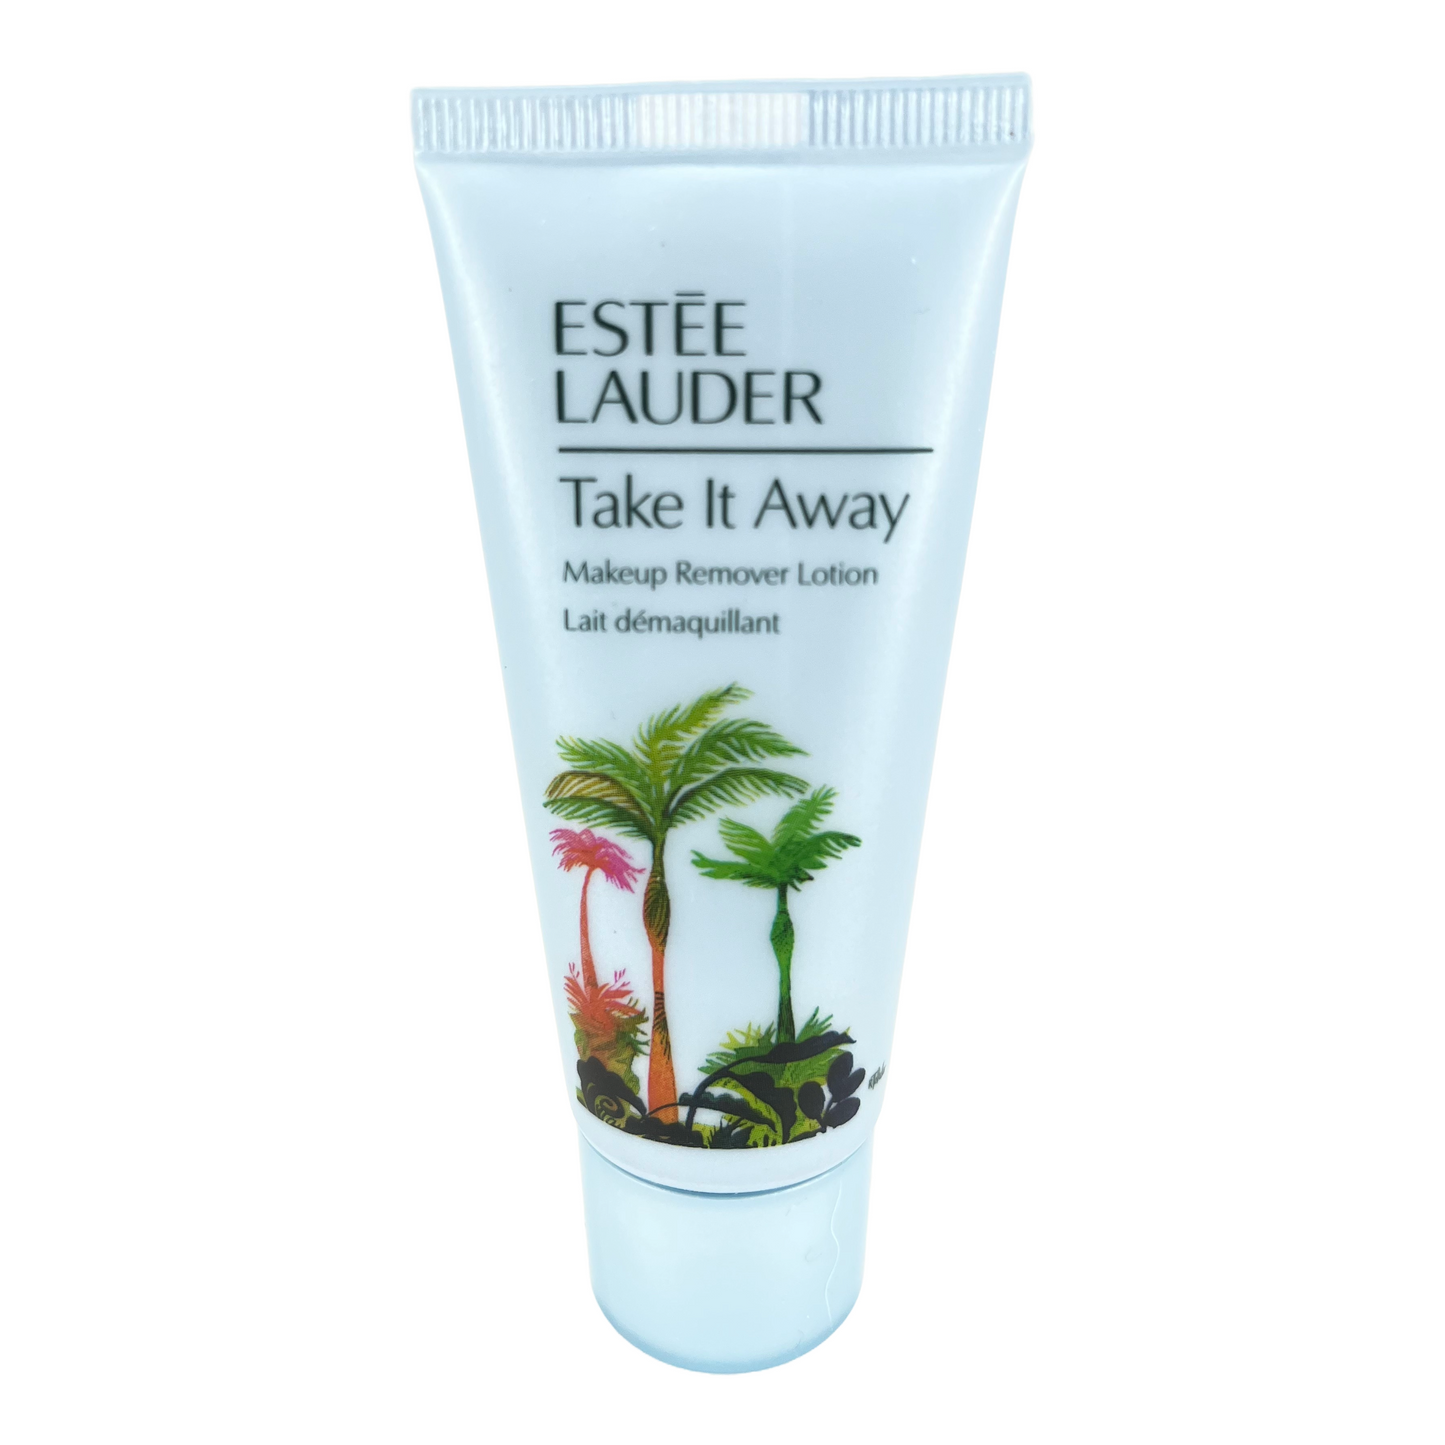 Estee Lauder Take It Away Make-Up Remover Lotion (Travel Size) 1.0 Fl. Oz. Cosmetics